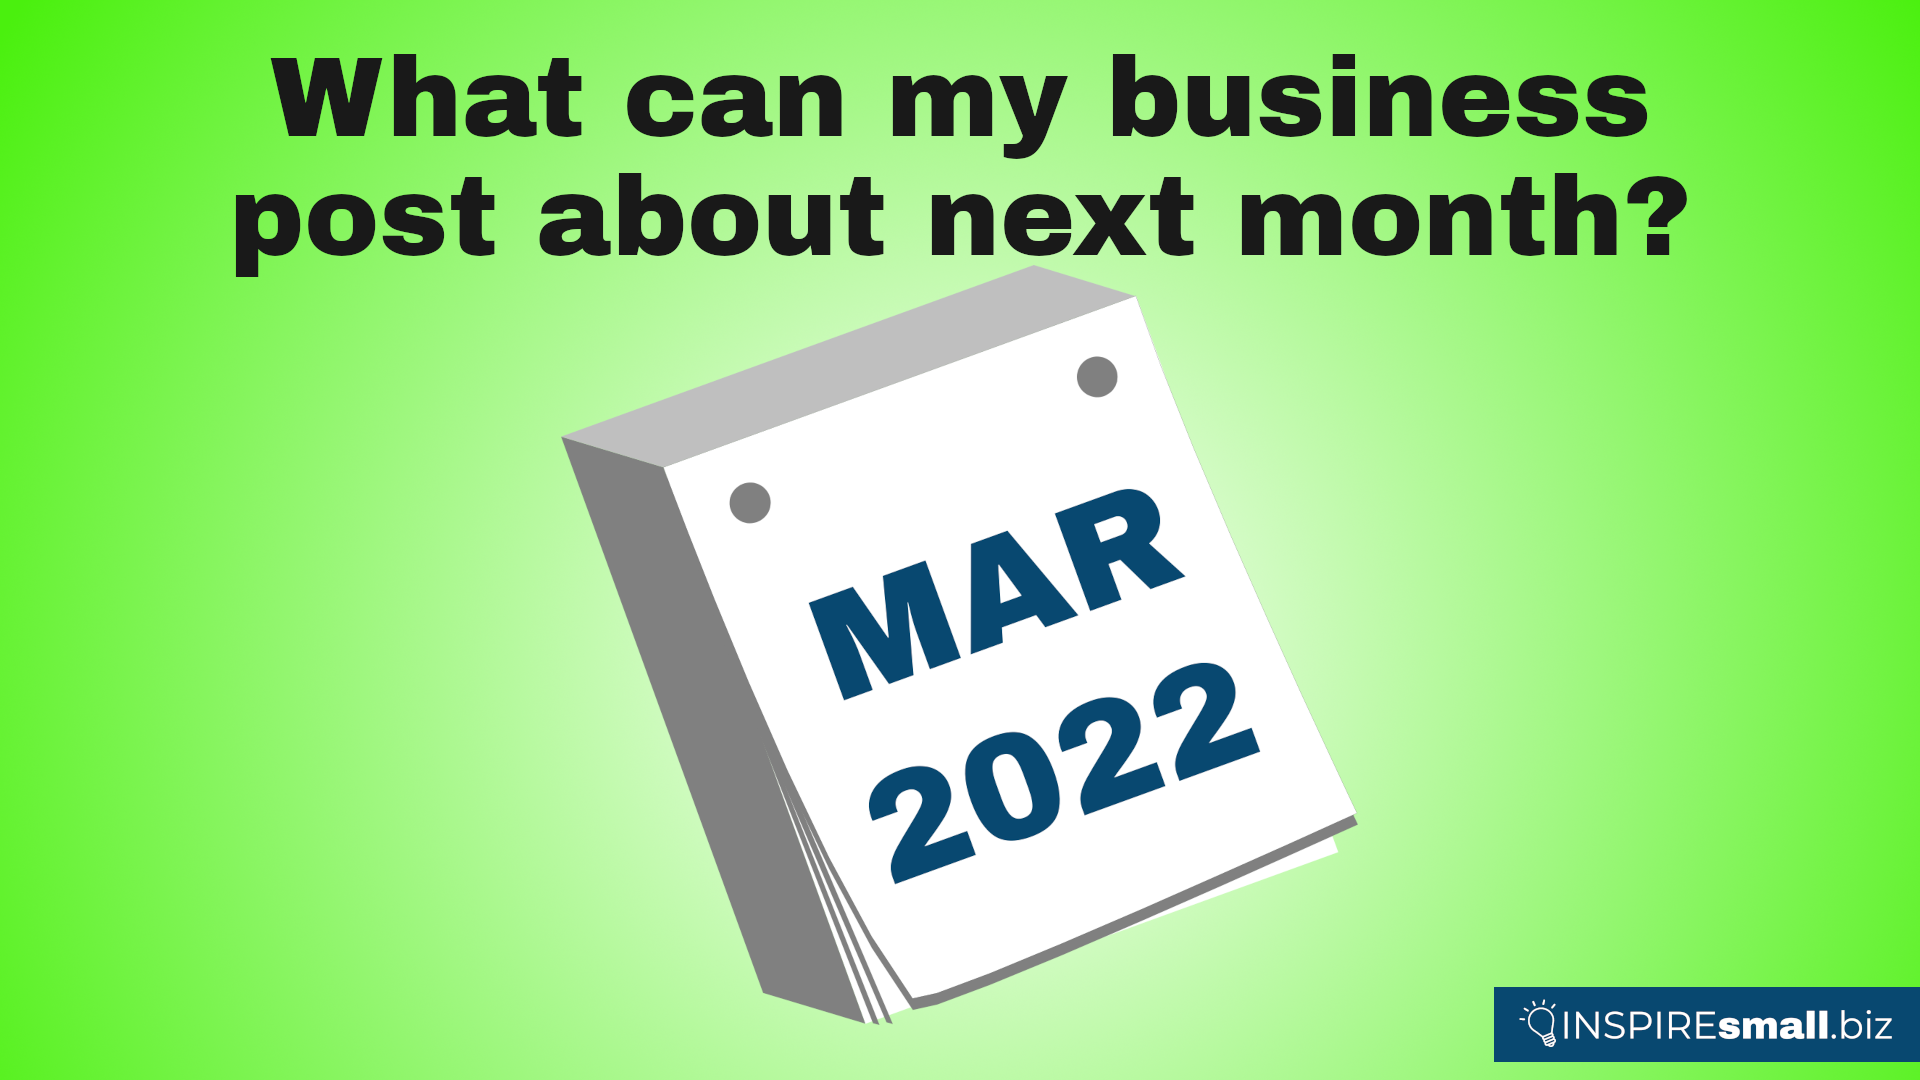 What can my business post about next month? March 2022